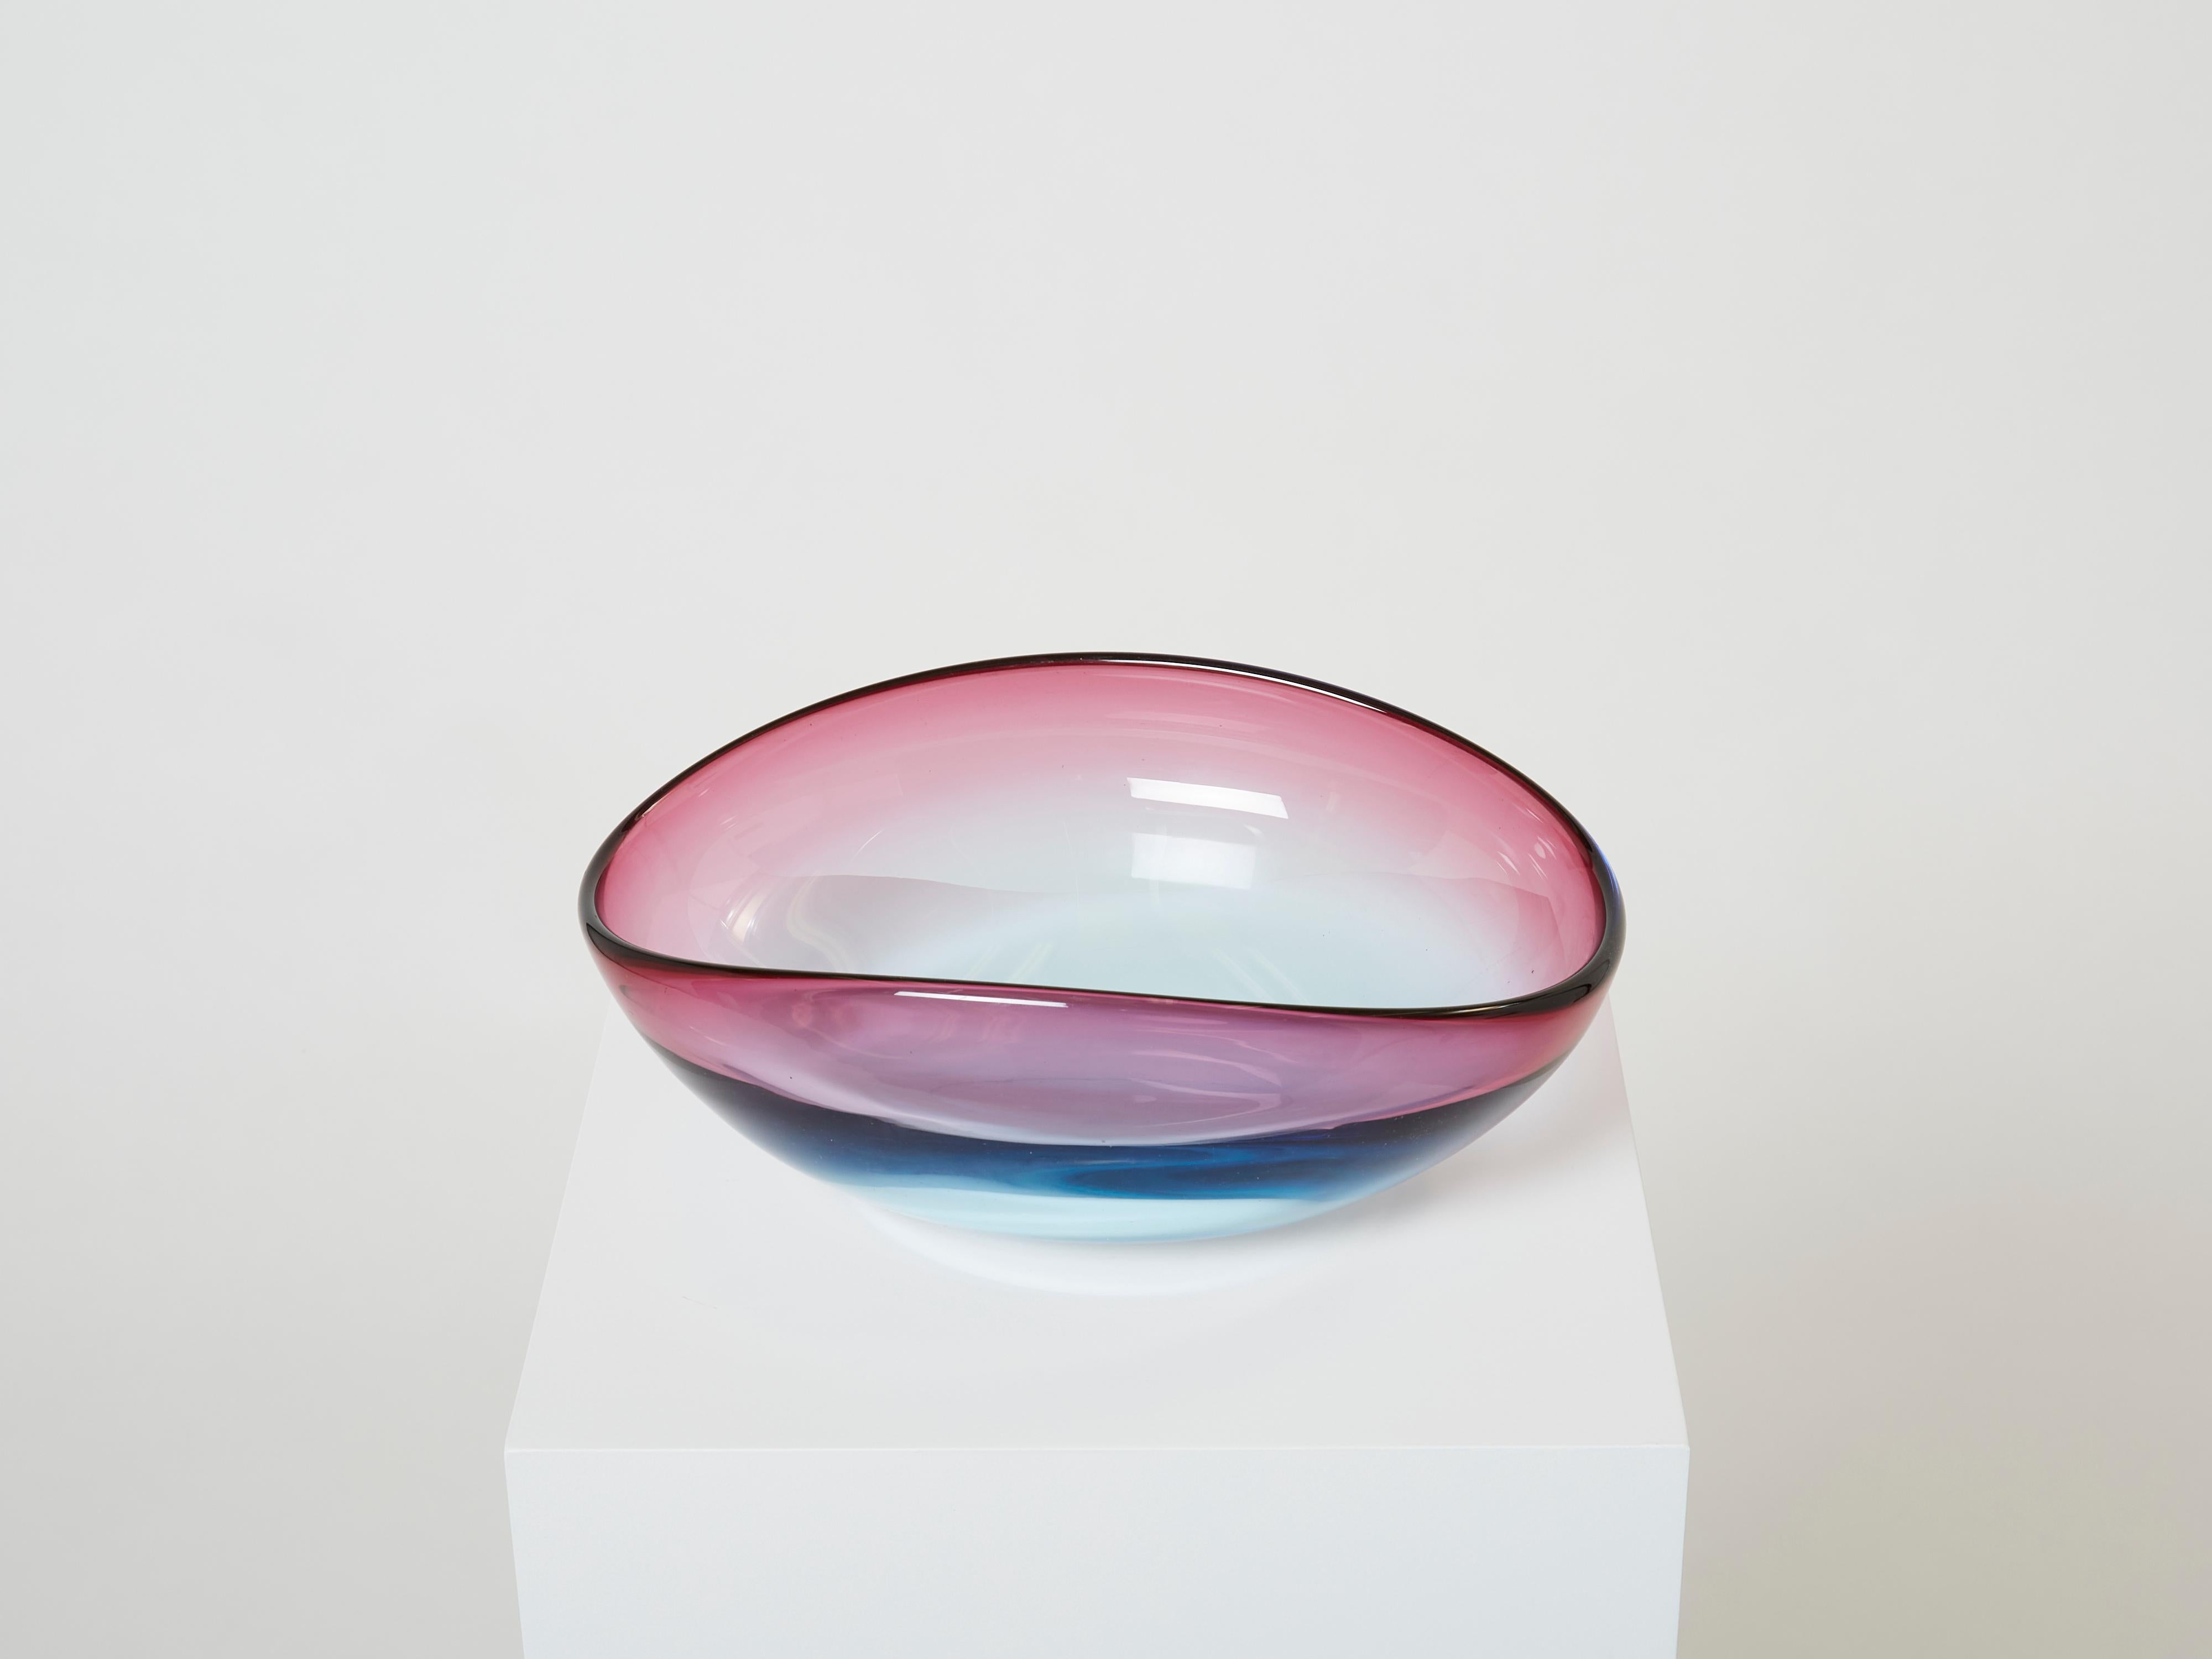 Beautiful Flavio Poli bowl centerpiece for Seguso Vetri D'Arte made in the 1960s from the Sommerso collection. This large bowl has eye-catching sunset colors, with pink glass submerged into blue glass. It is quite large, oval shaped, and has a